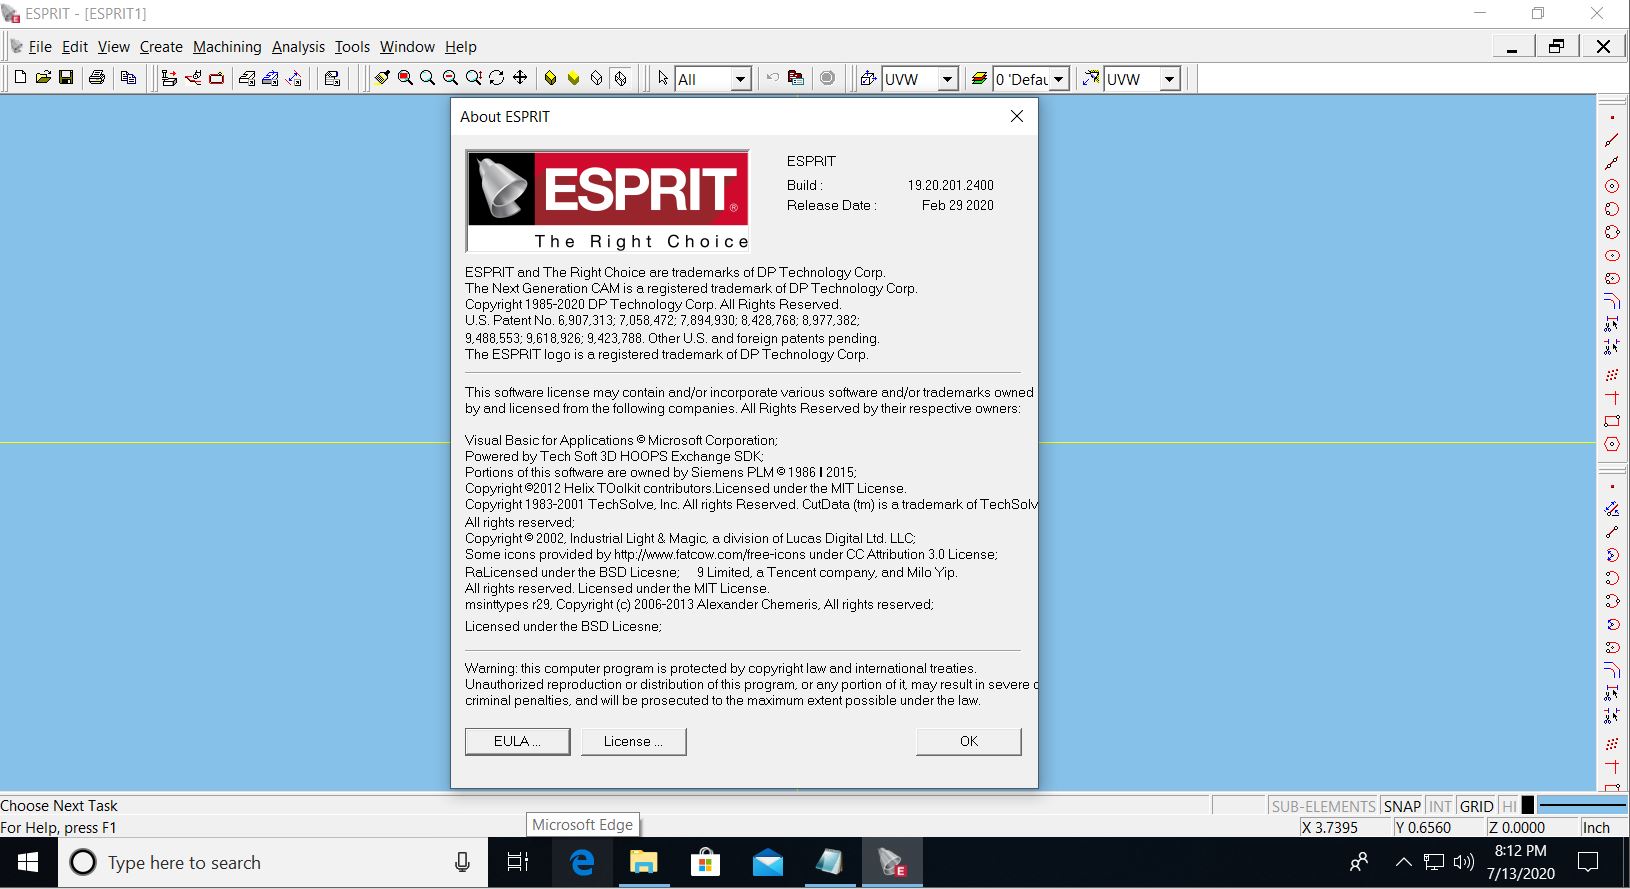 Working with Esprit 2020 R1 (19.20.201.2400) full license